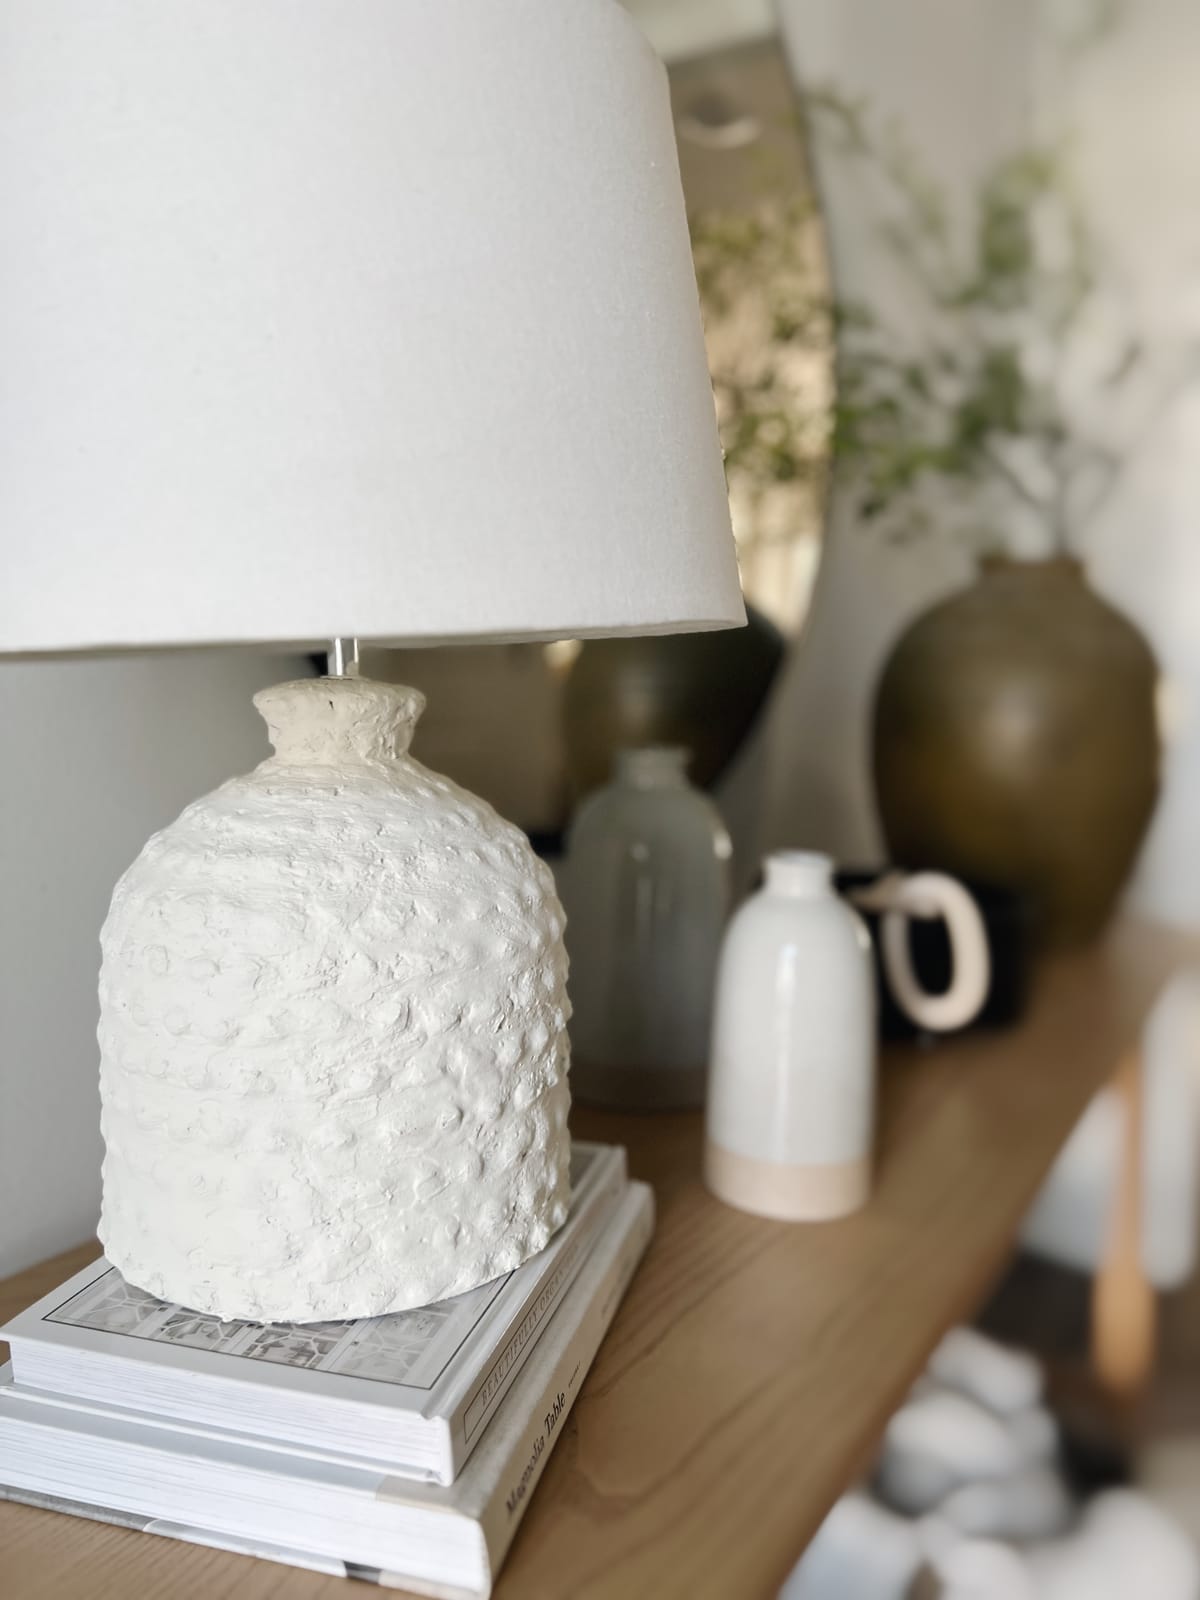 DIY: UPCYCLING A THRIFTED LAMP ON A BUDGET